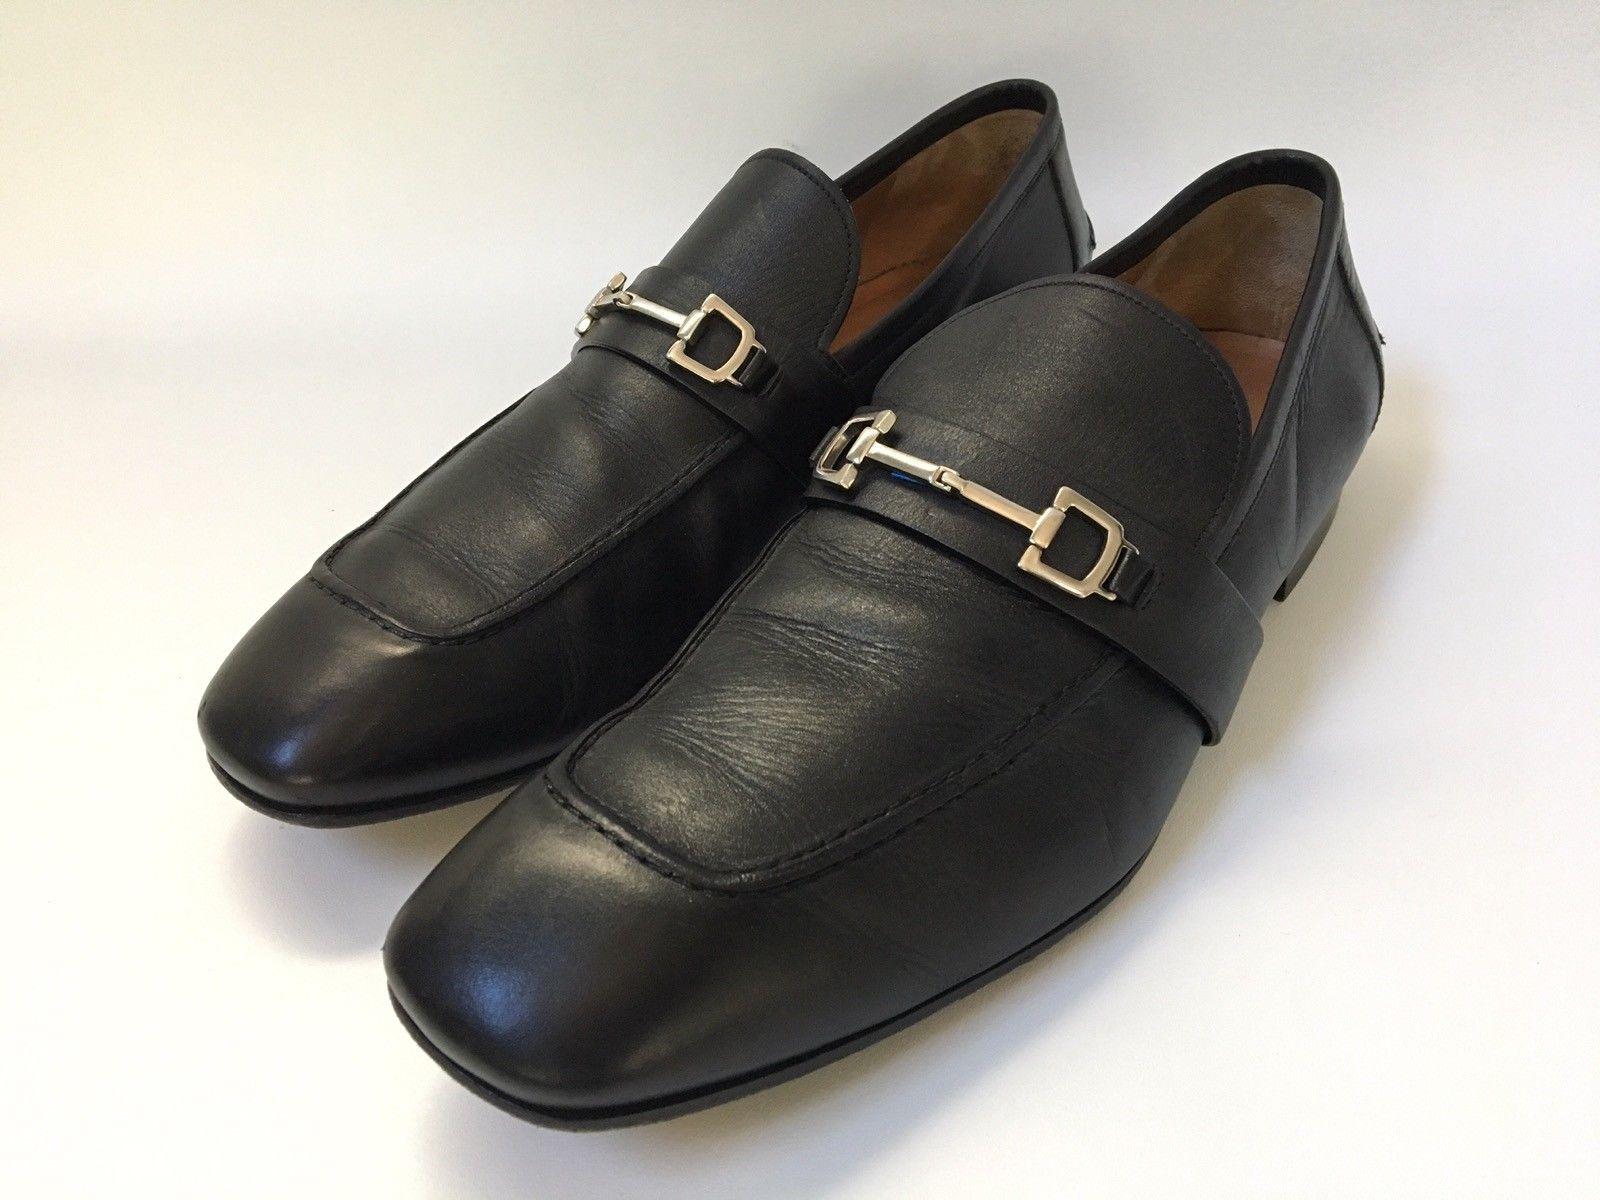 Men’s Gucci Horsebit Loafers in black leather with silver hardware.  US size 11.5 (Euro 44/45) in medium width.  Uppers and lowers of shoes in very good condition.